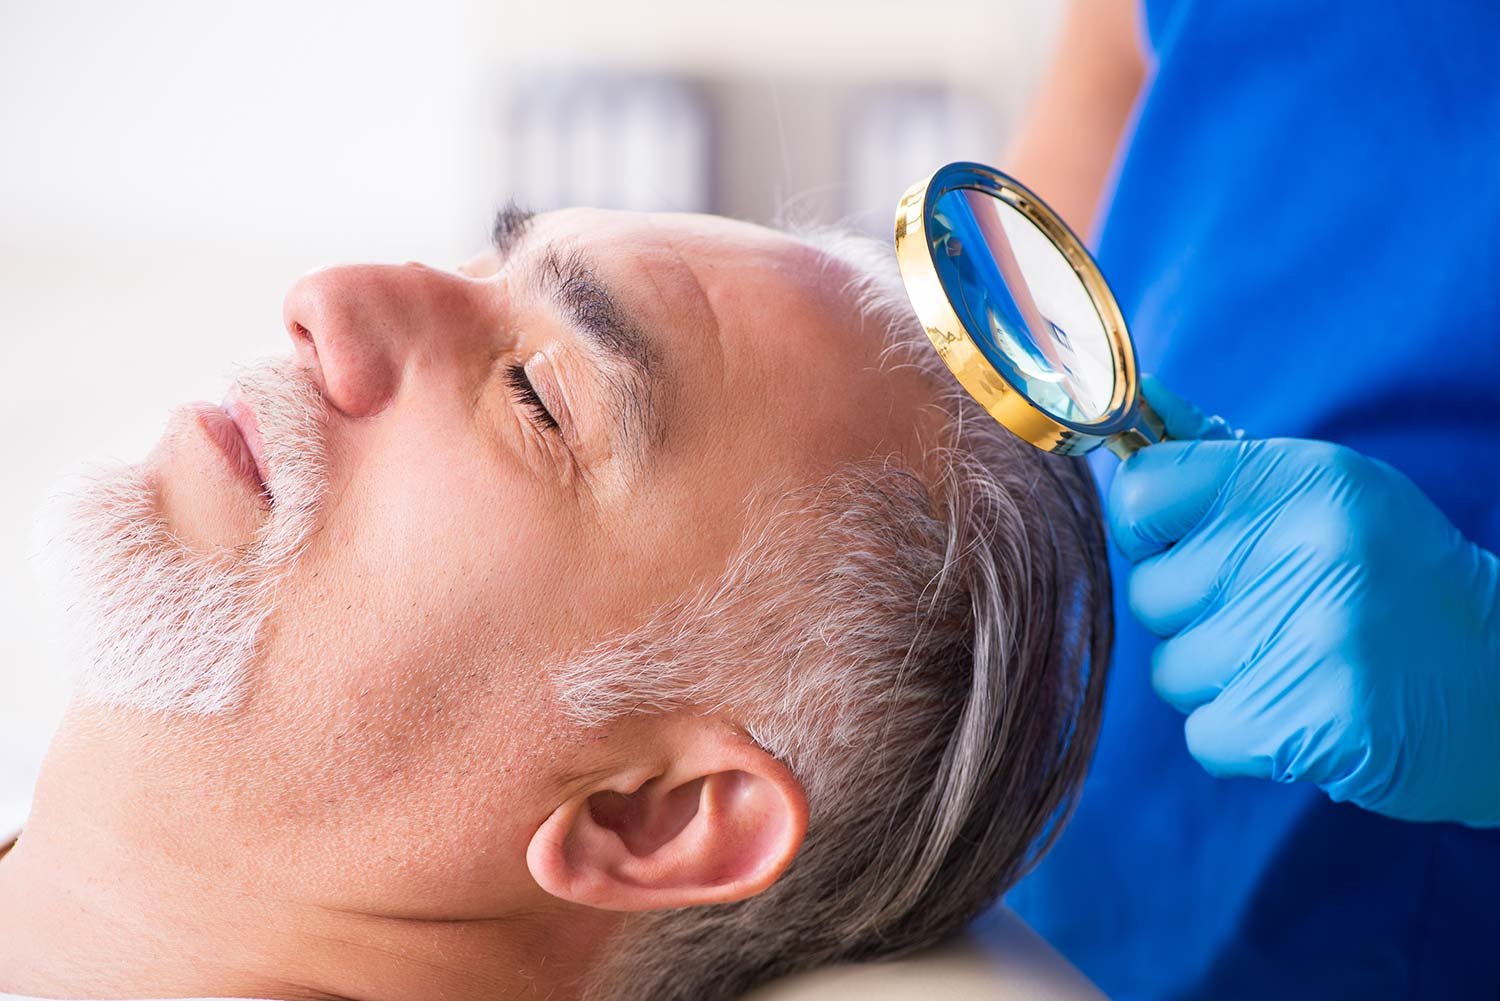 The Right Age for Undergoing Hair Transplant Surgery